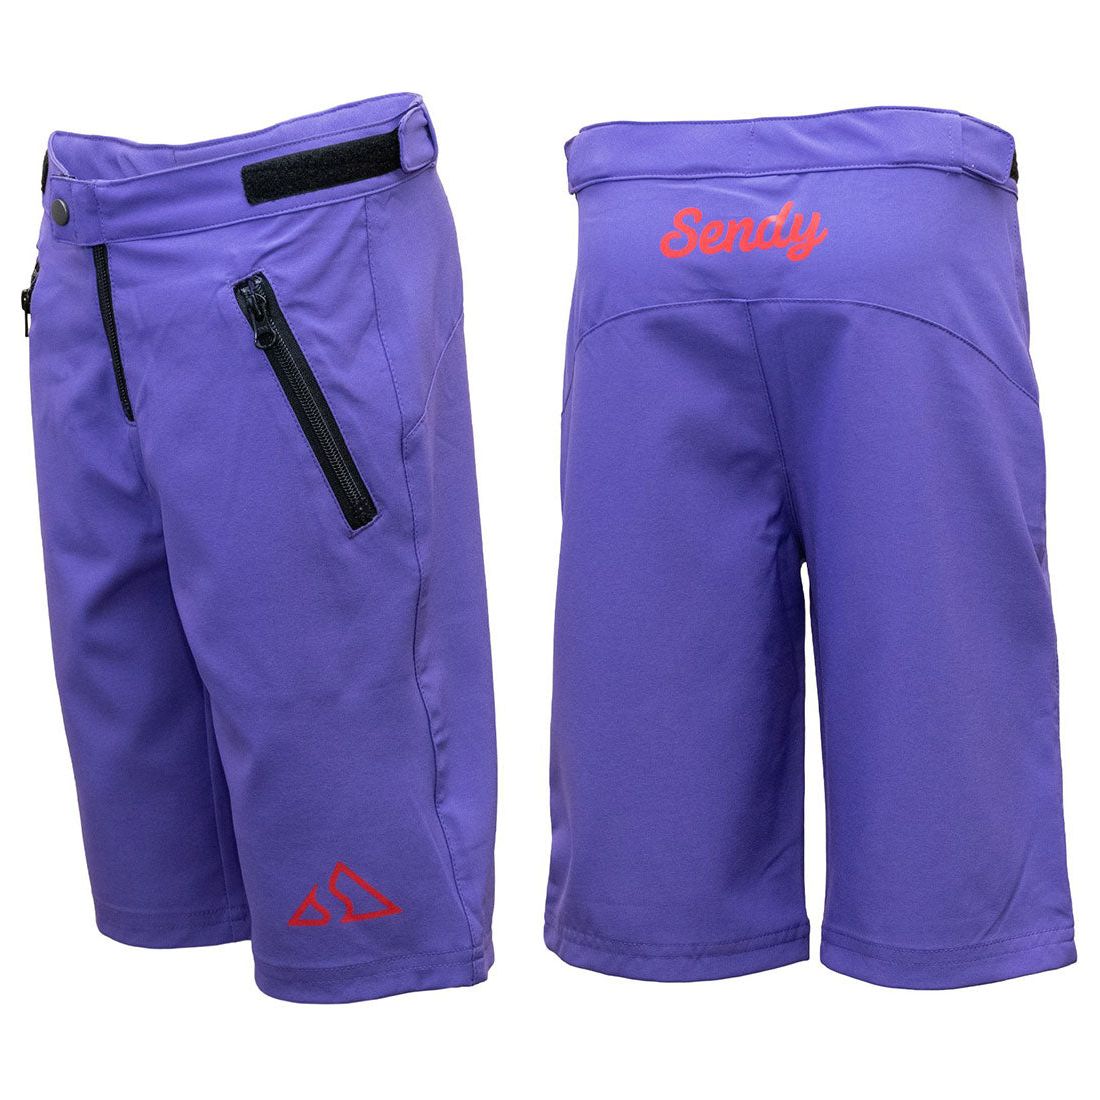 Sendy Send It Youth Shell Shorts - Youth L - The Purp